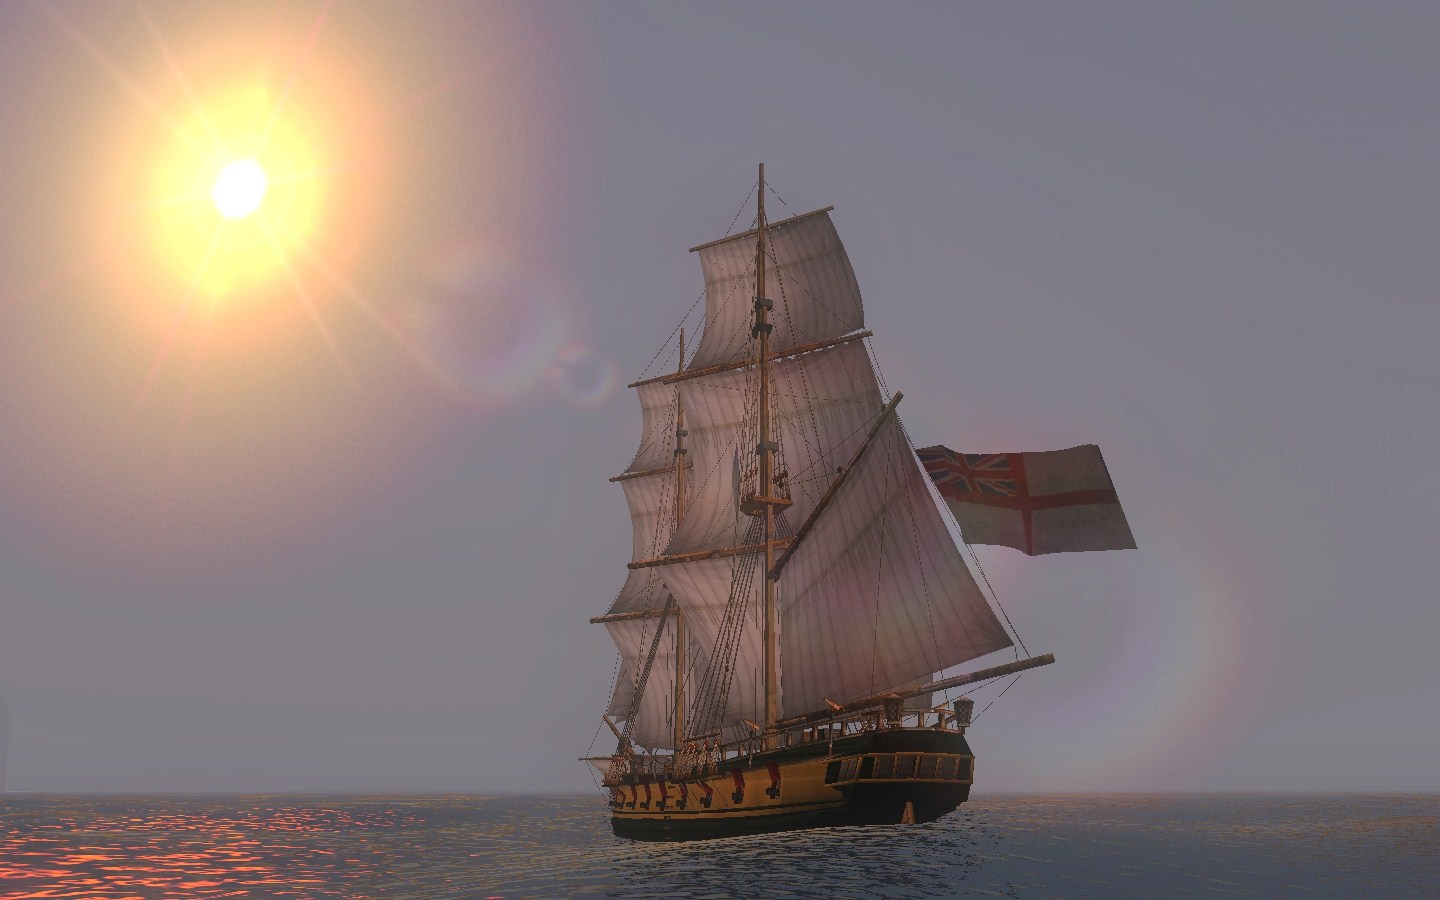 pirates of the carribean mod